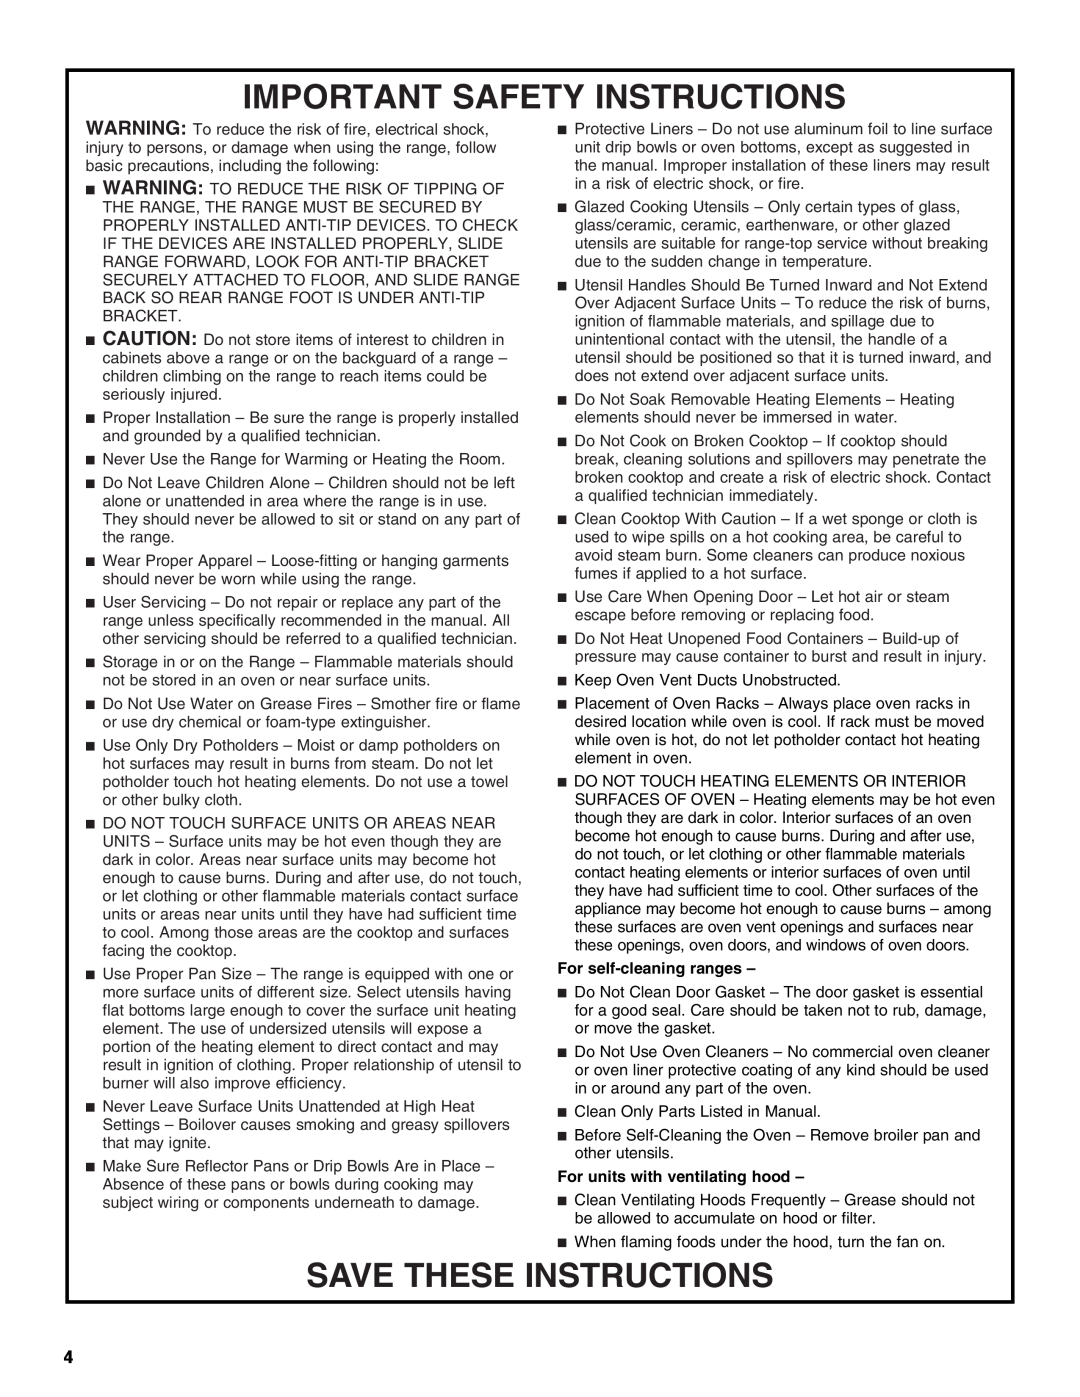 Whirlpool FEP310KV3 manual Important Safety Instructions, Save These Instructions, For self-cleaningranges 